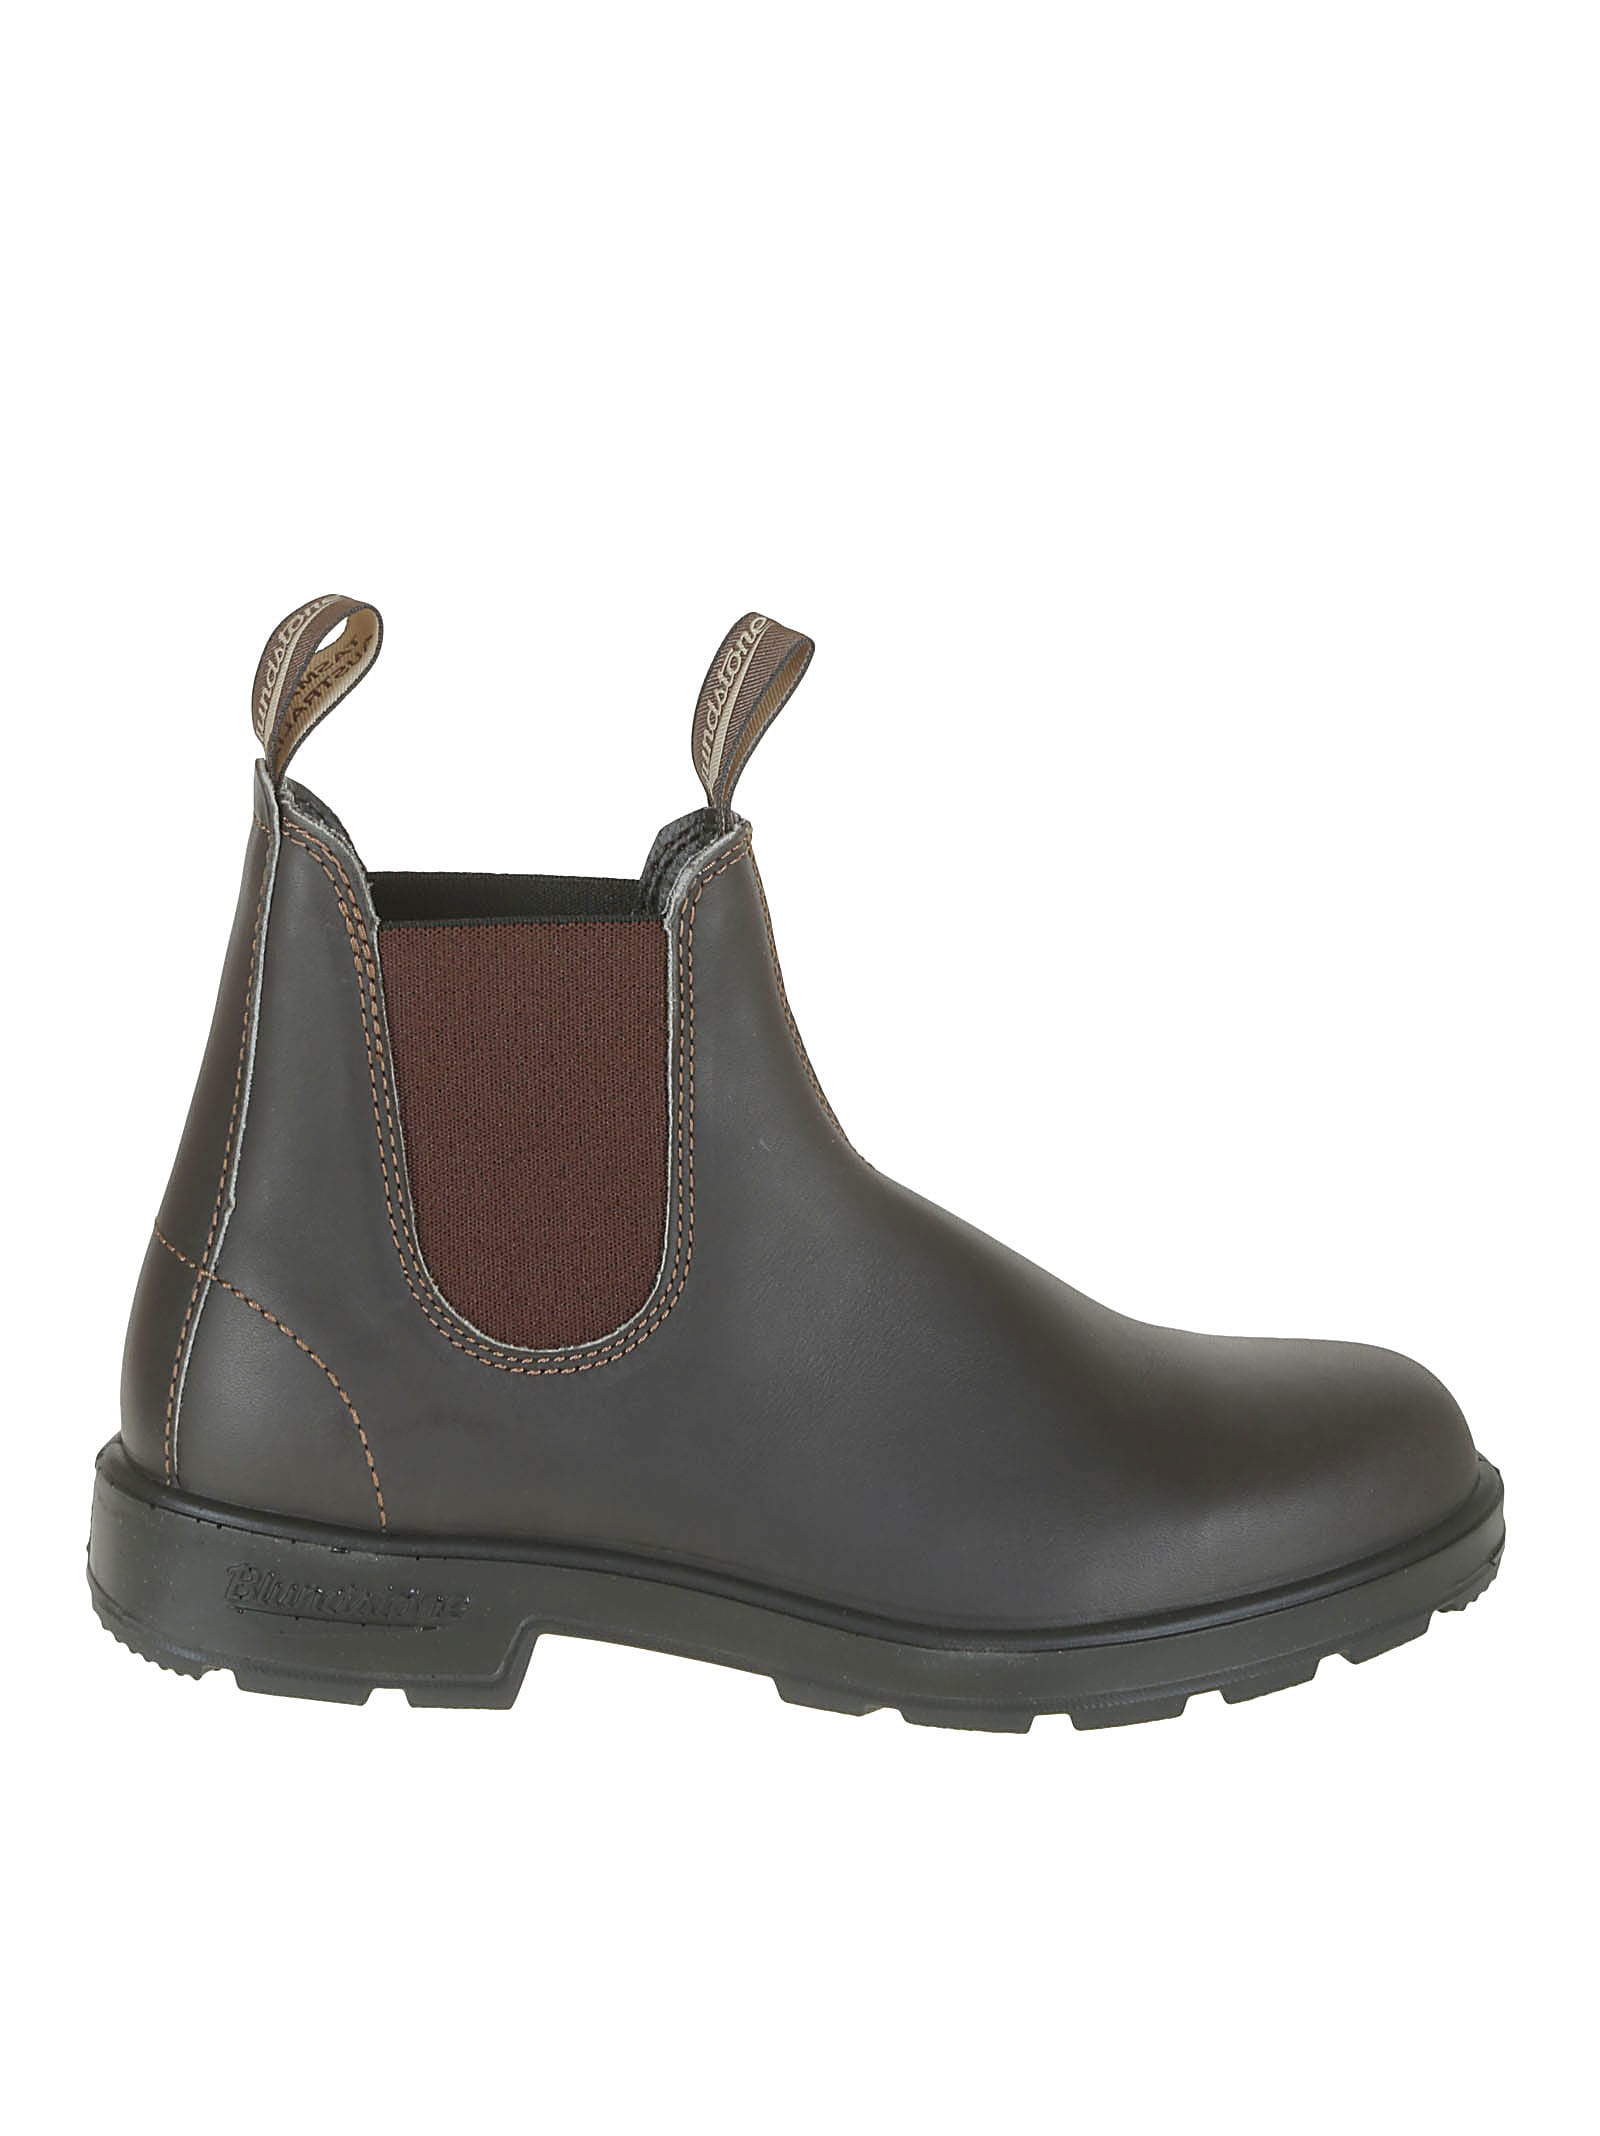 Shop Blundstone 500 Stout Brown Leather In Stout Brown & Brown